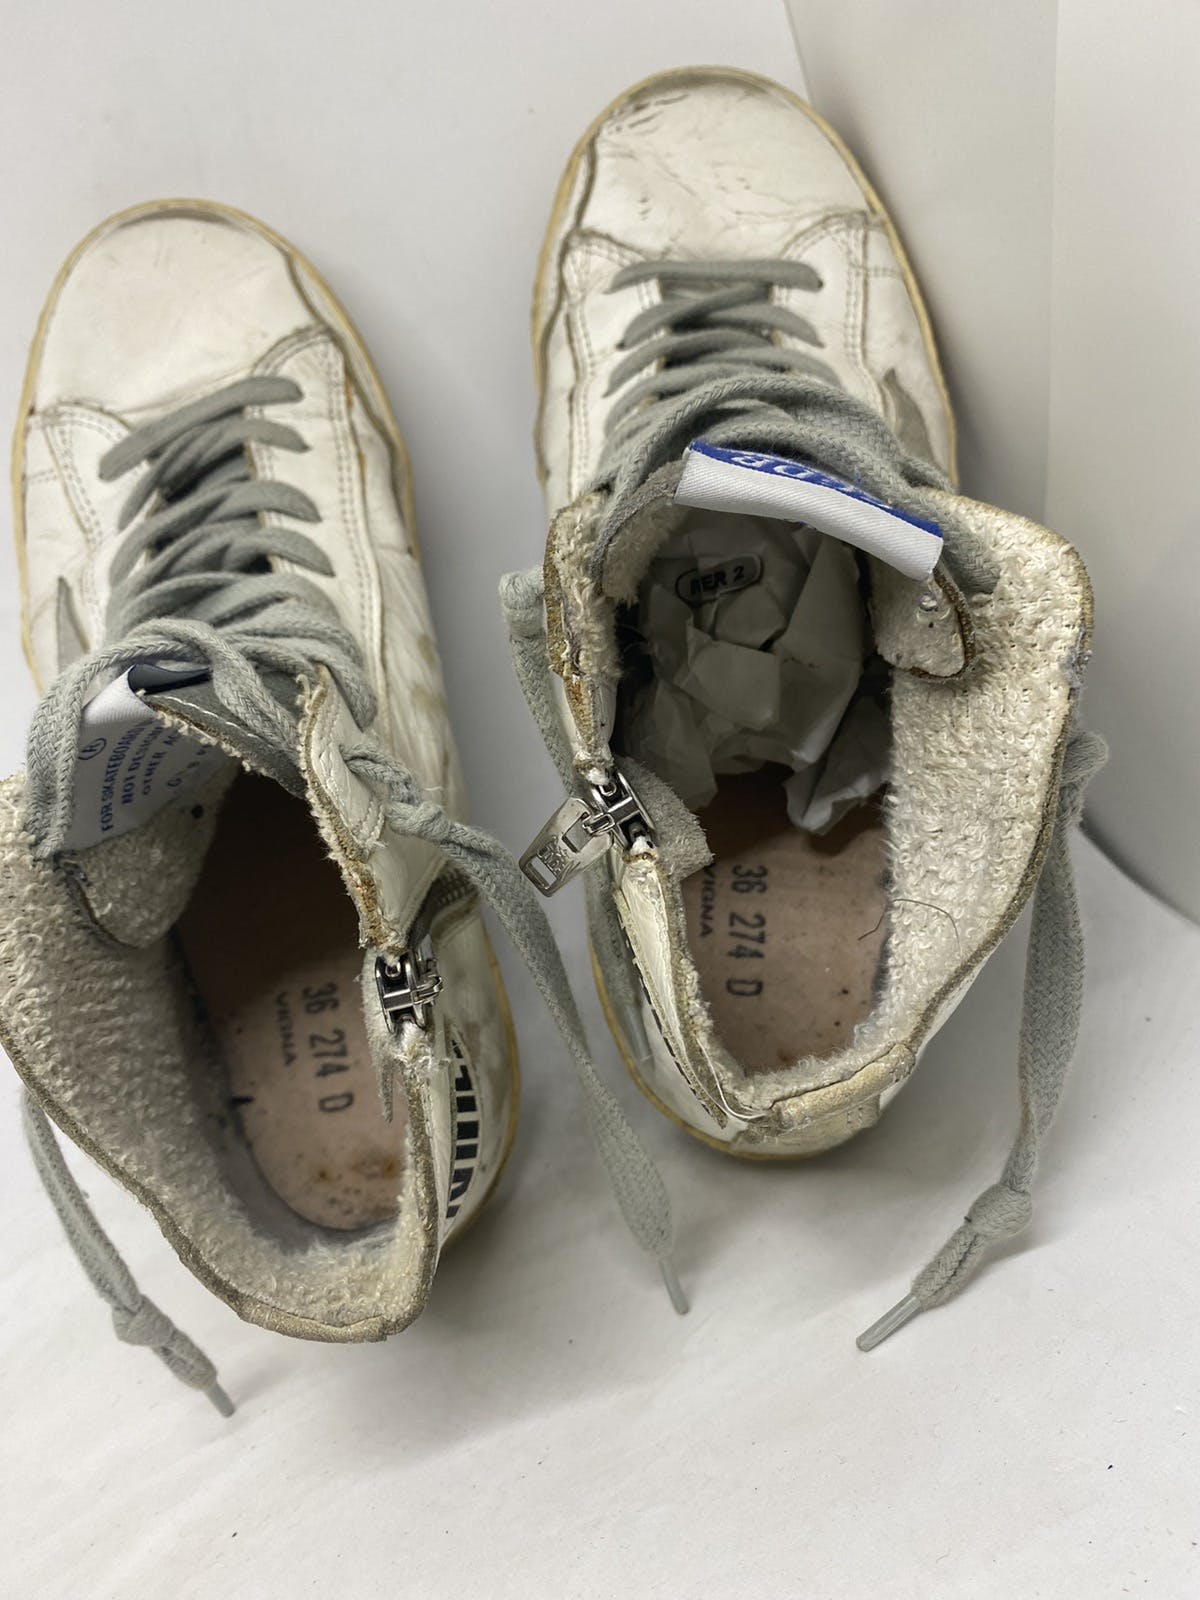 Golden Goose Francy suede patch sneakers size 36 - 6